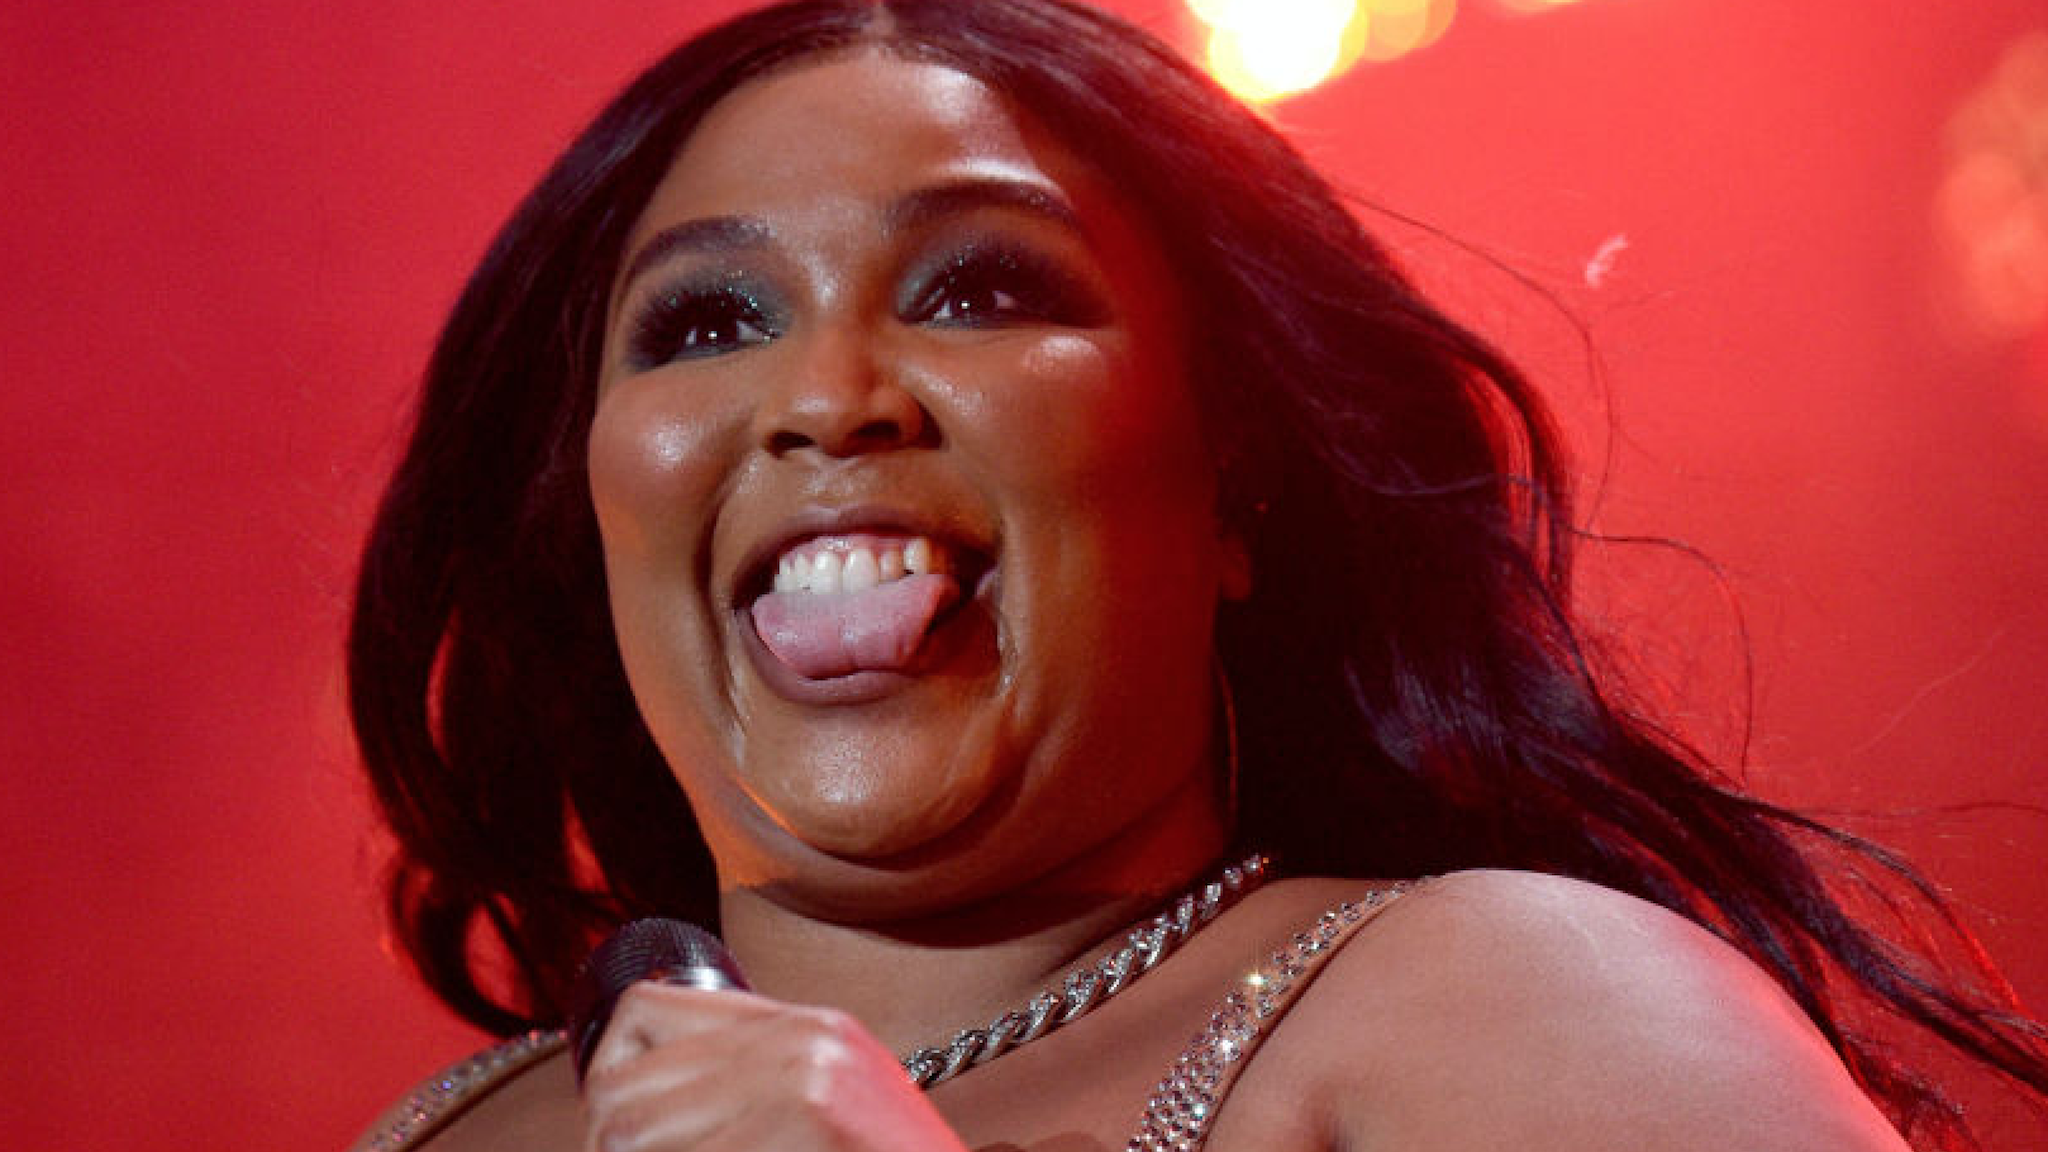 Lizzo performs onstage during 102.7 KIIS FM's Jingle Ball 2019 Presented by Capital One at the Forum on December 6, 2019 in Los Angeles, California.